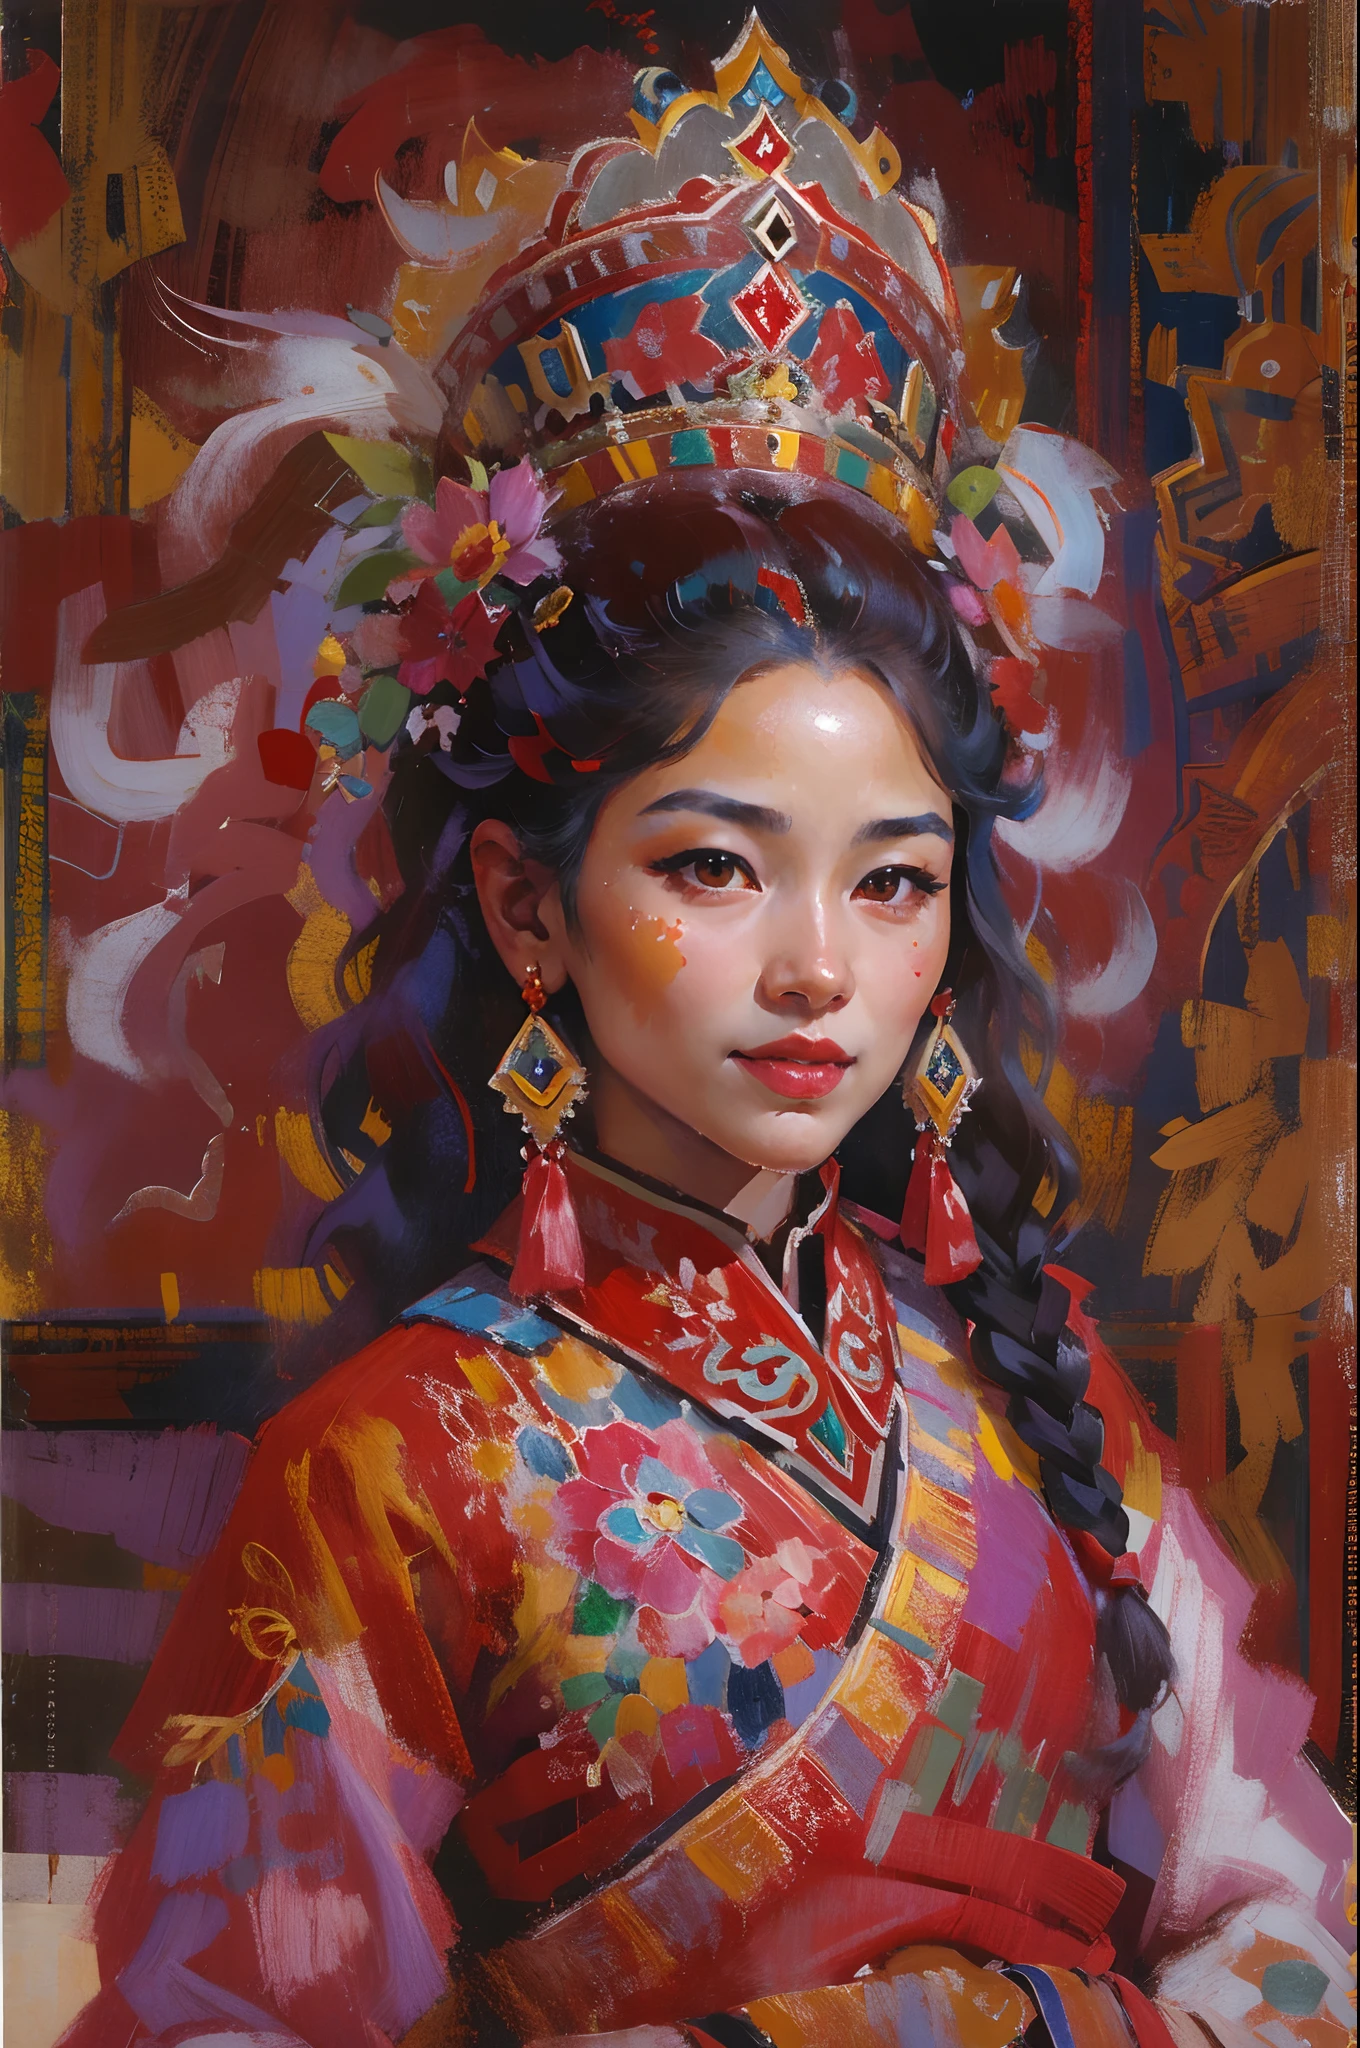 Potala Palace, Lhasa，Beautiful Tibetan girl，Tibetan costumes，ssmile，White teeth are exposed，Dance，cabelos preto e longos，Red face，oil painted，inks，acrycle painting，tmasterpiece，Renaissance style，best qualtiy，A high resolution，super-fine，Eyes detailed，Face detailed，hair detail，Accurate，Clear eye focus close-up